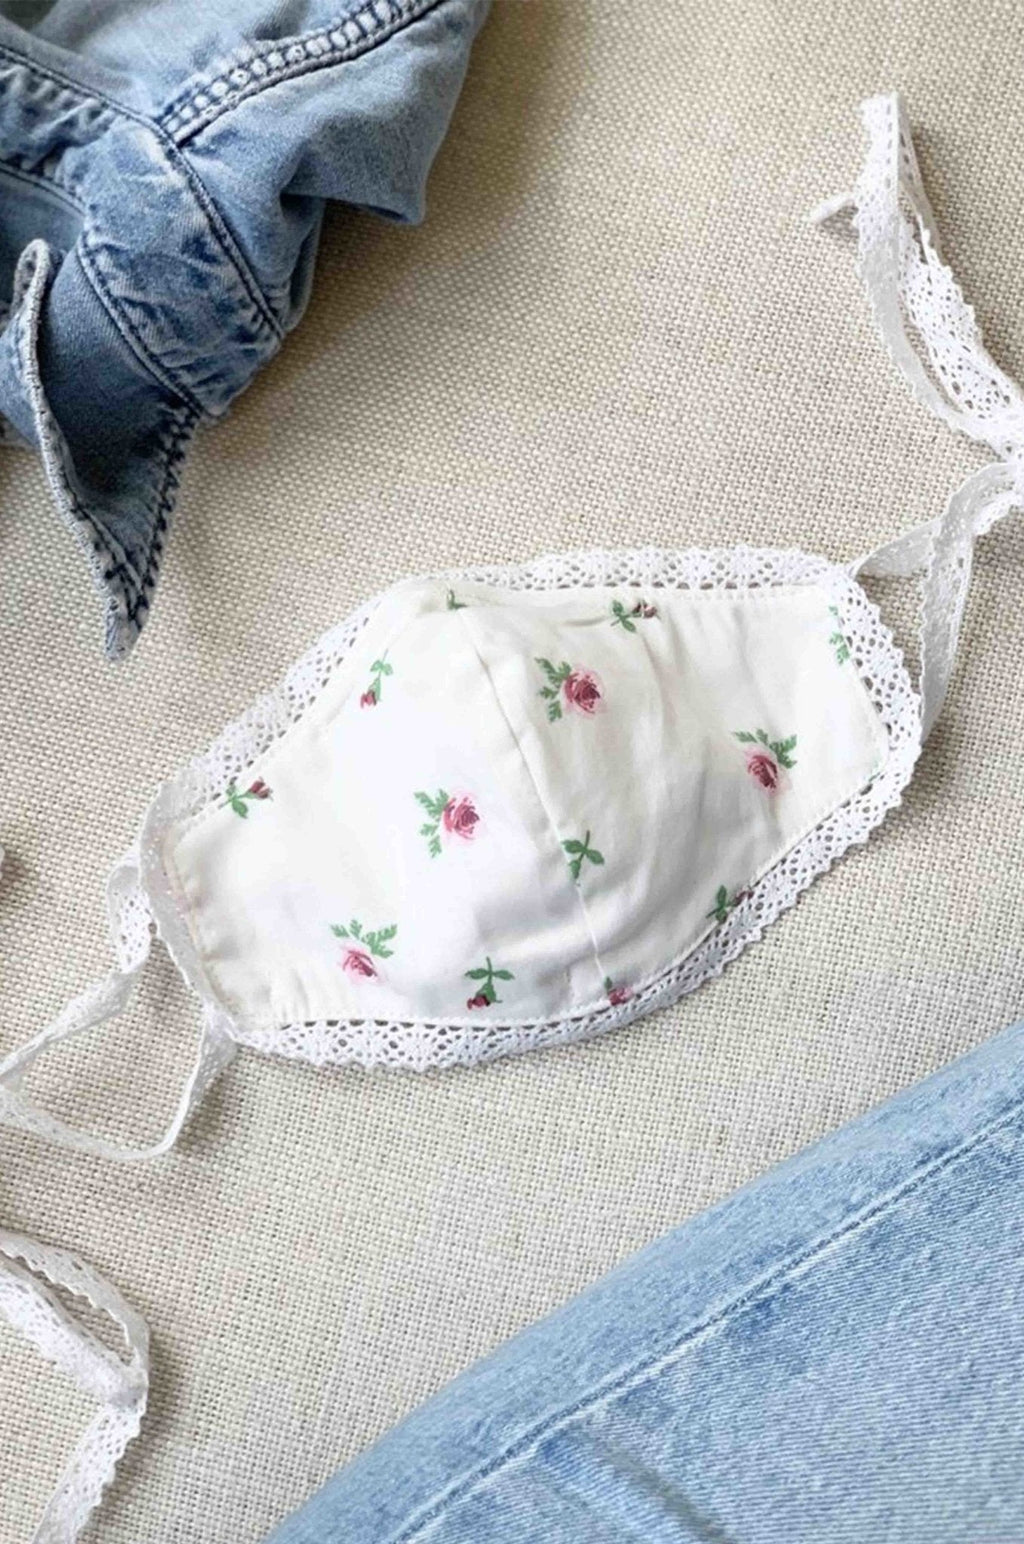 Lillian Face Mask - Small berry floral with lace trim - MERRITT CHARLES